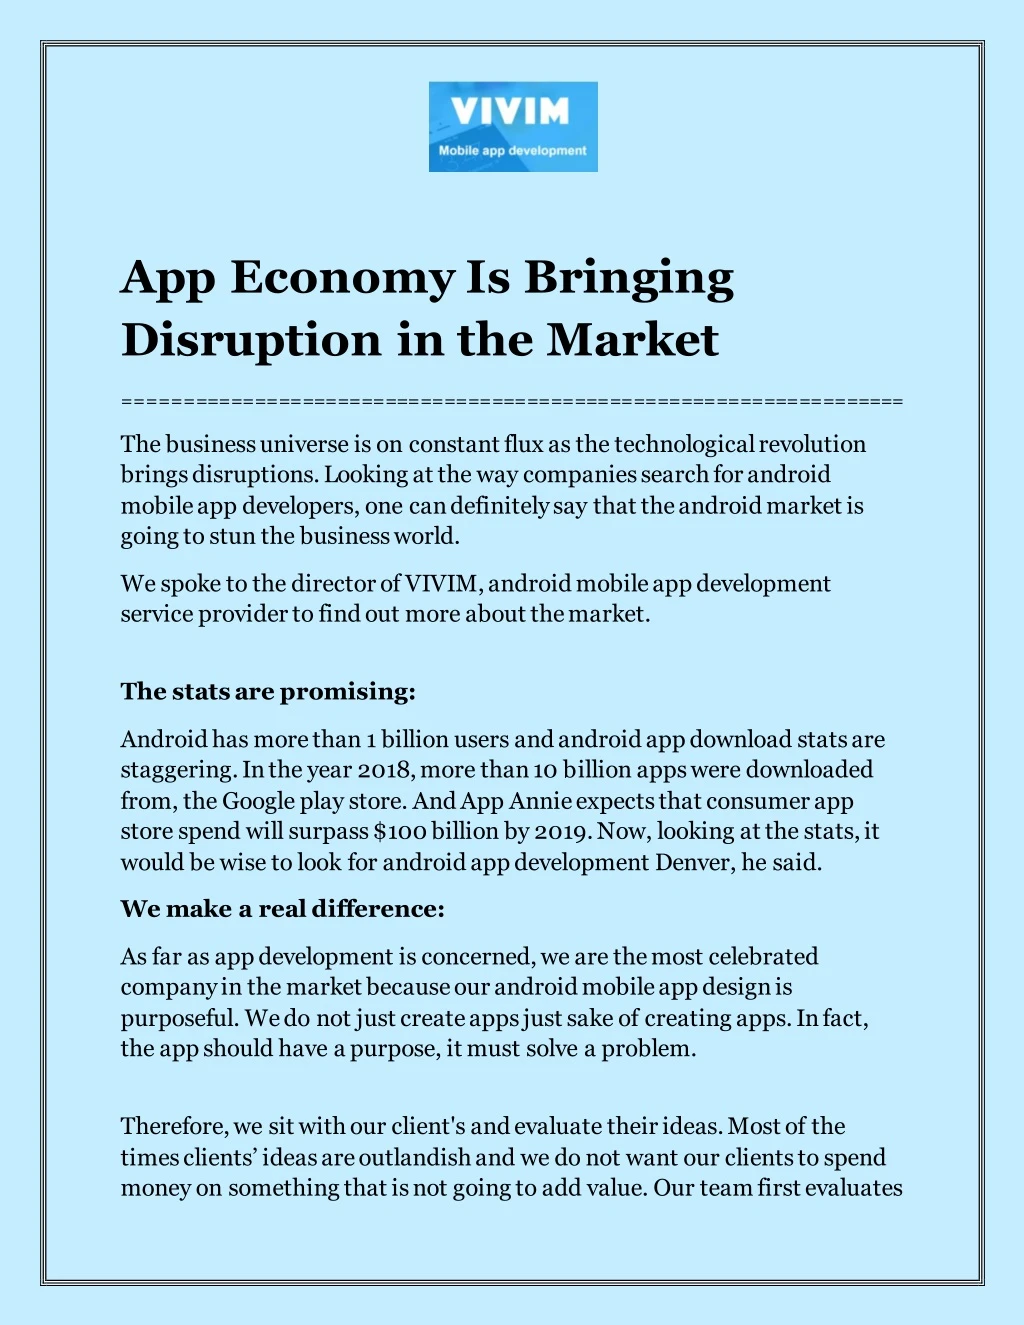 app economy is bringing disruption in the market